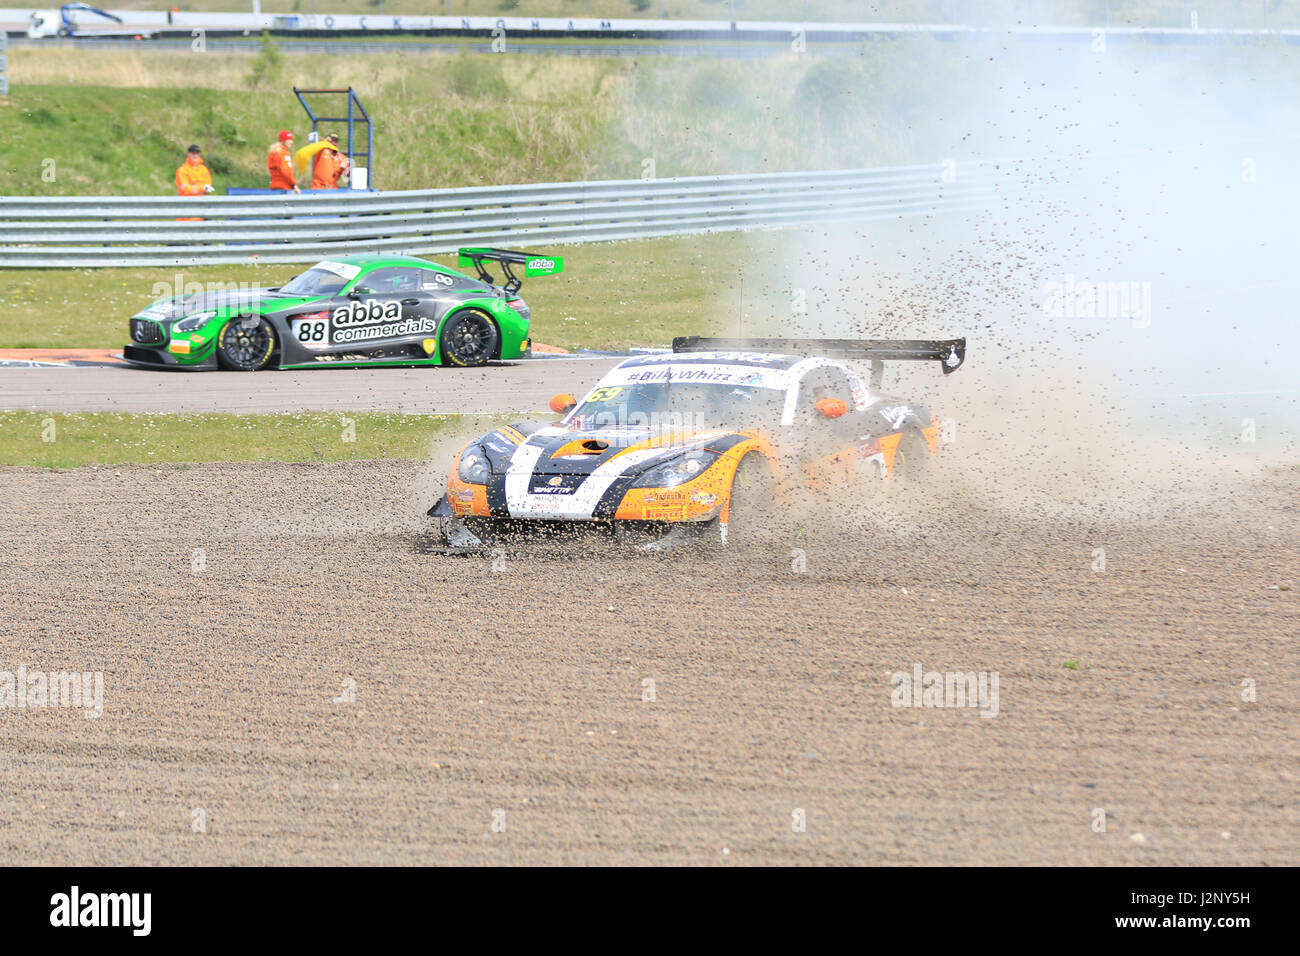 Rockingham, United Kingdom. 30th Apr, 2017. Century Motorsport Car 69 (Harry Gottsacker and Nathan Freke) loses control and goes into the gravel before being recovered to rejoin the British GT race at Rockingham Motor Speedway Credit: Paren Raval/Alamy Live News Stock Photo